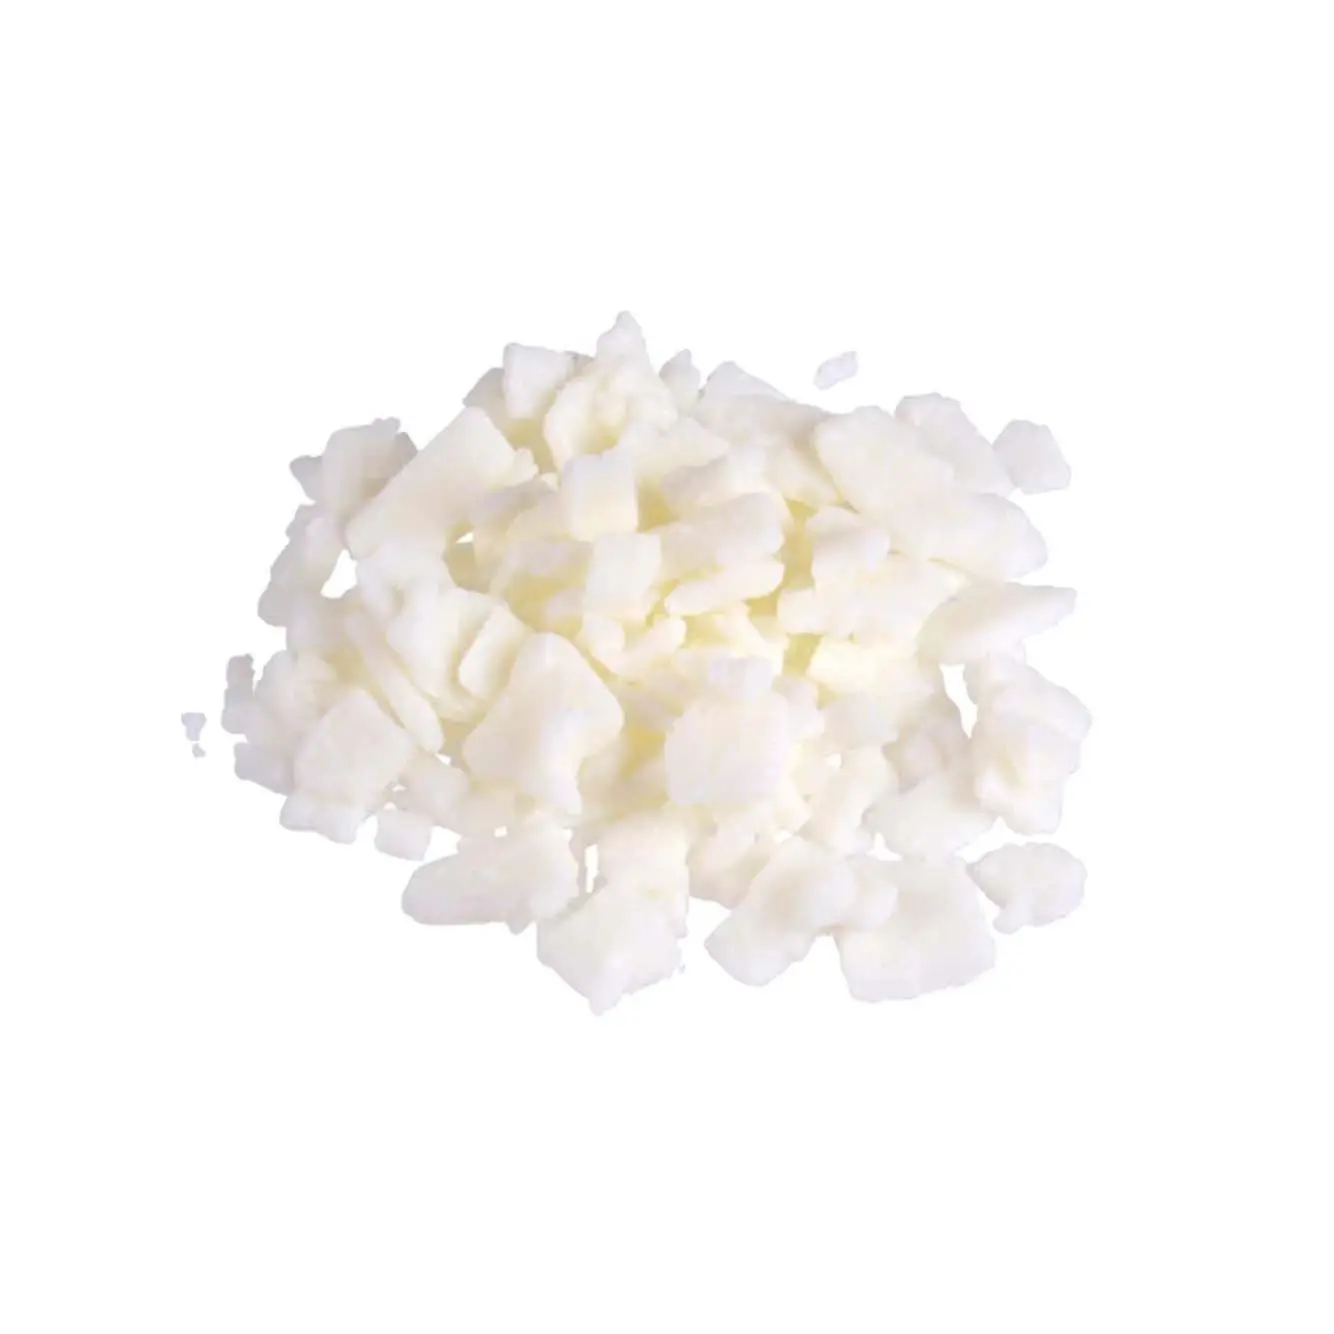 Soft Soy Wax Bulk Soy Wax for Candle Making Natural Ingredients Coconut Wax